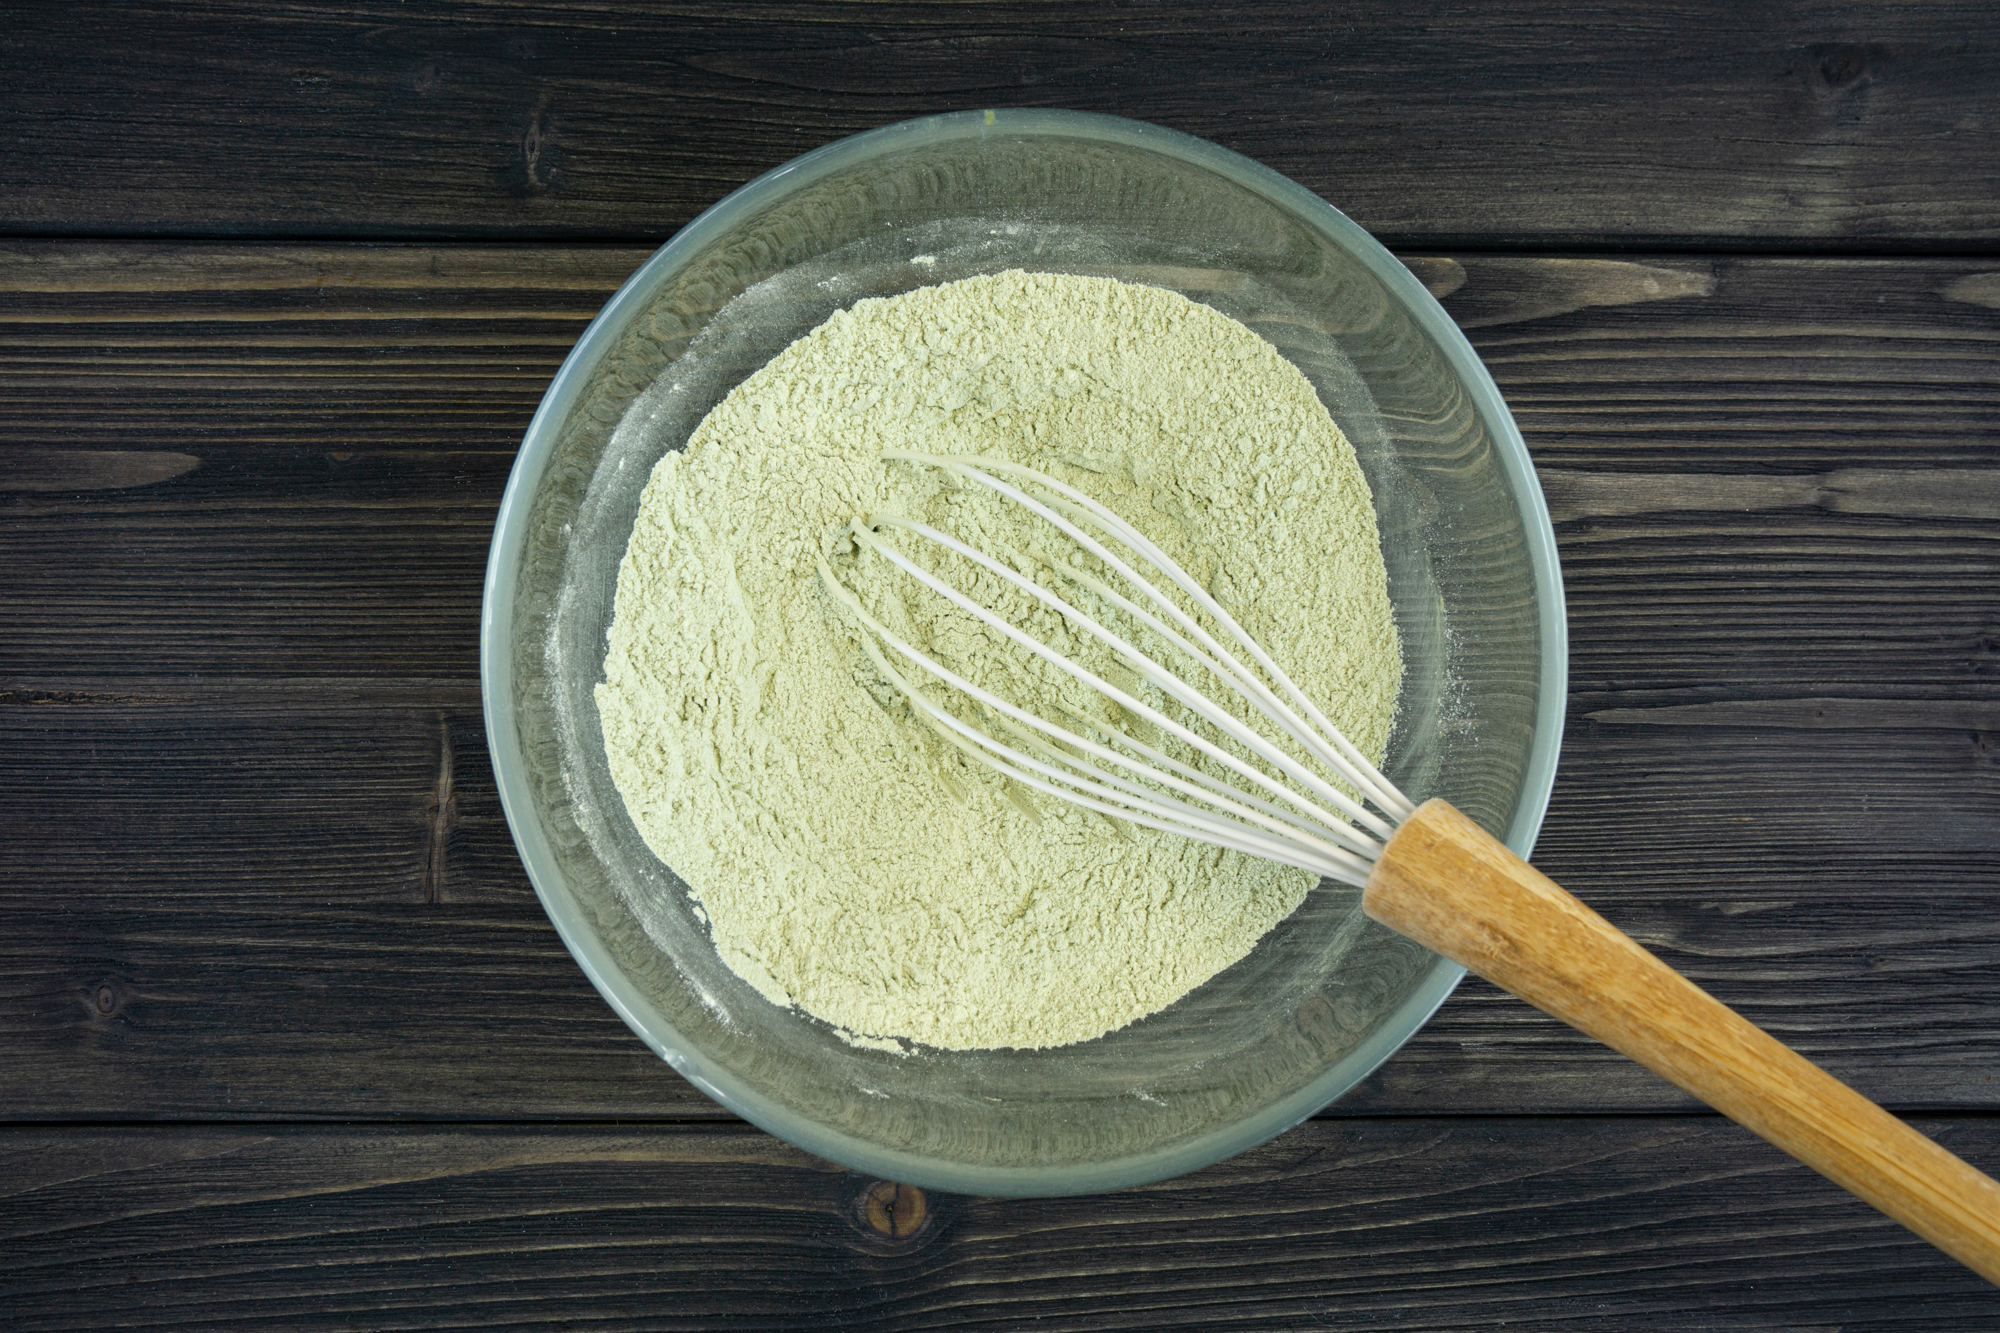 Flour mixed with matcha powder in a glass bowl